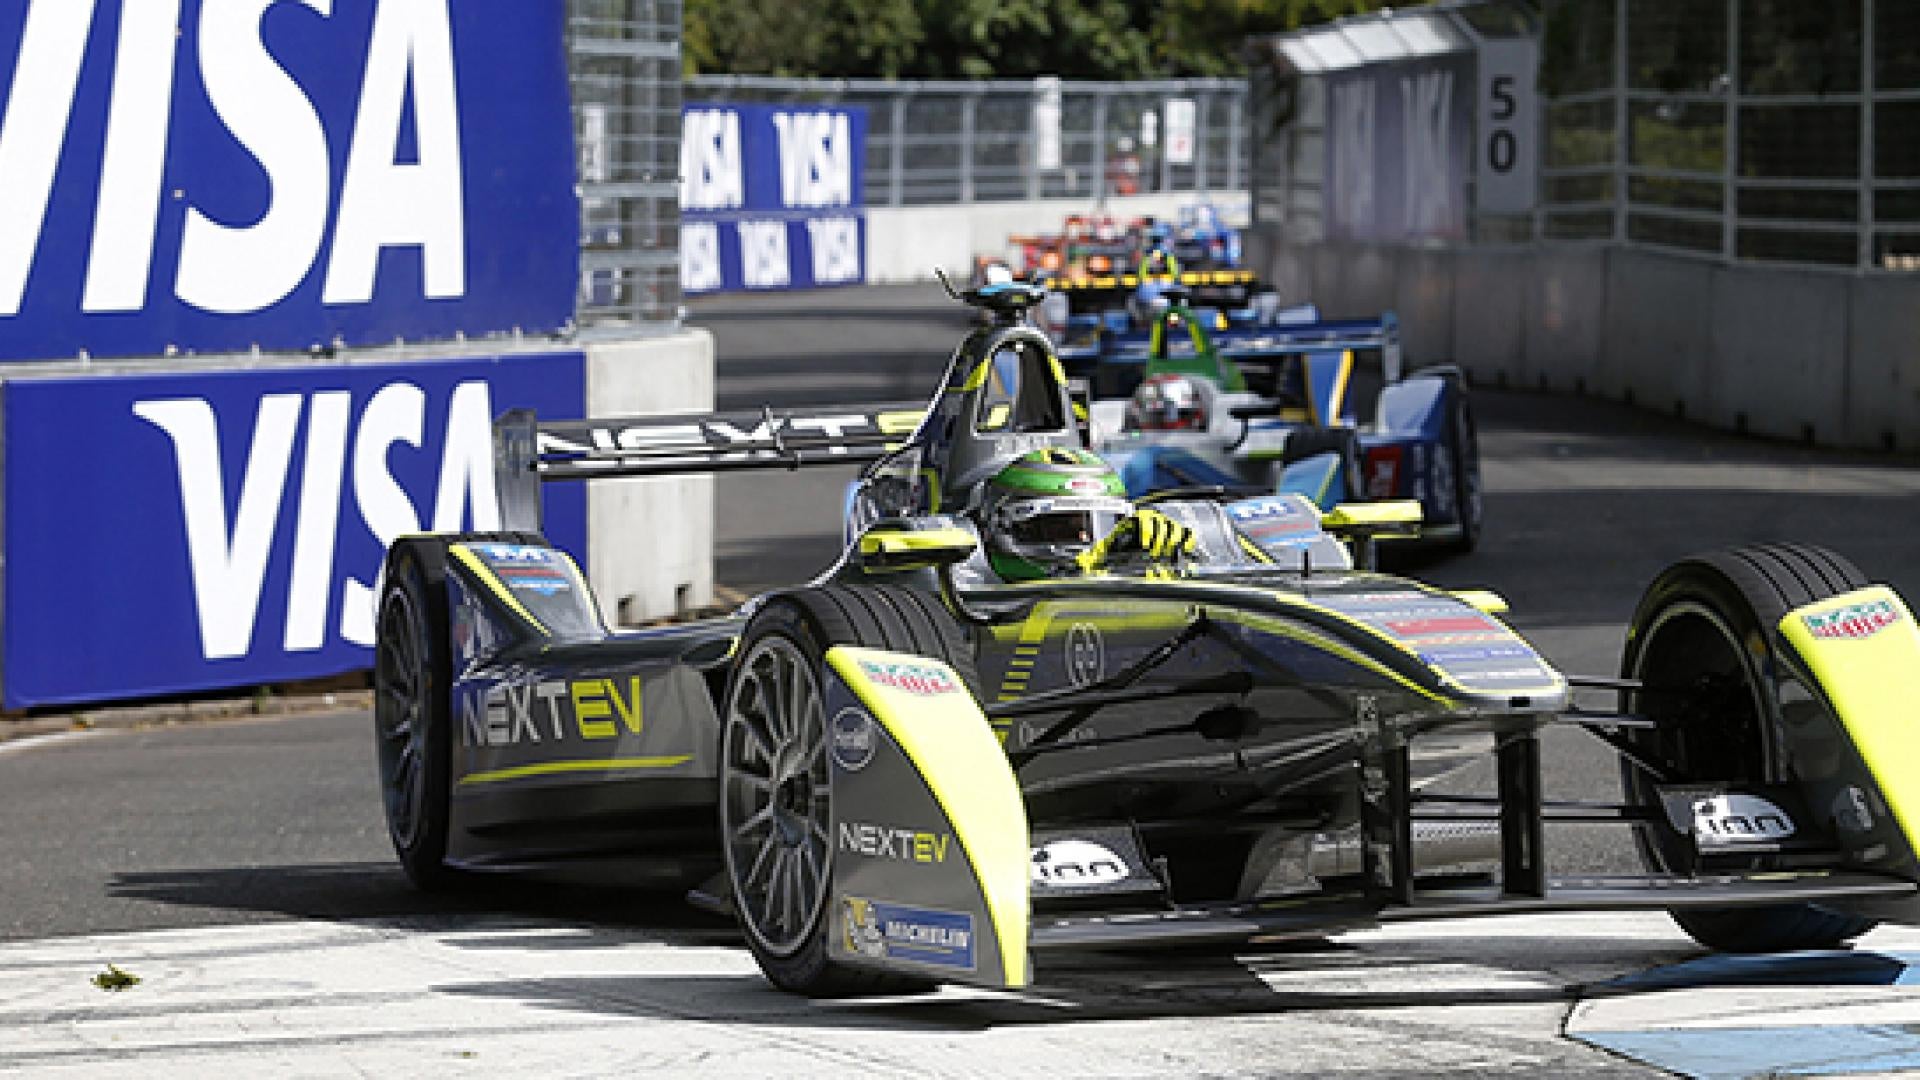 NEXTEV TCR wins the Drivers Title in the first Formula E Championship ever